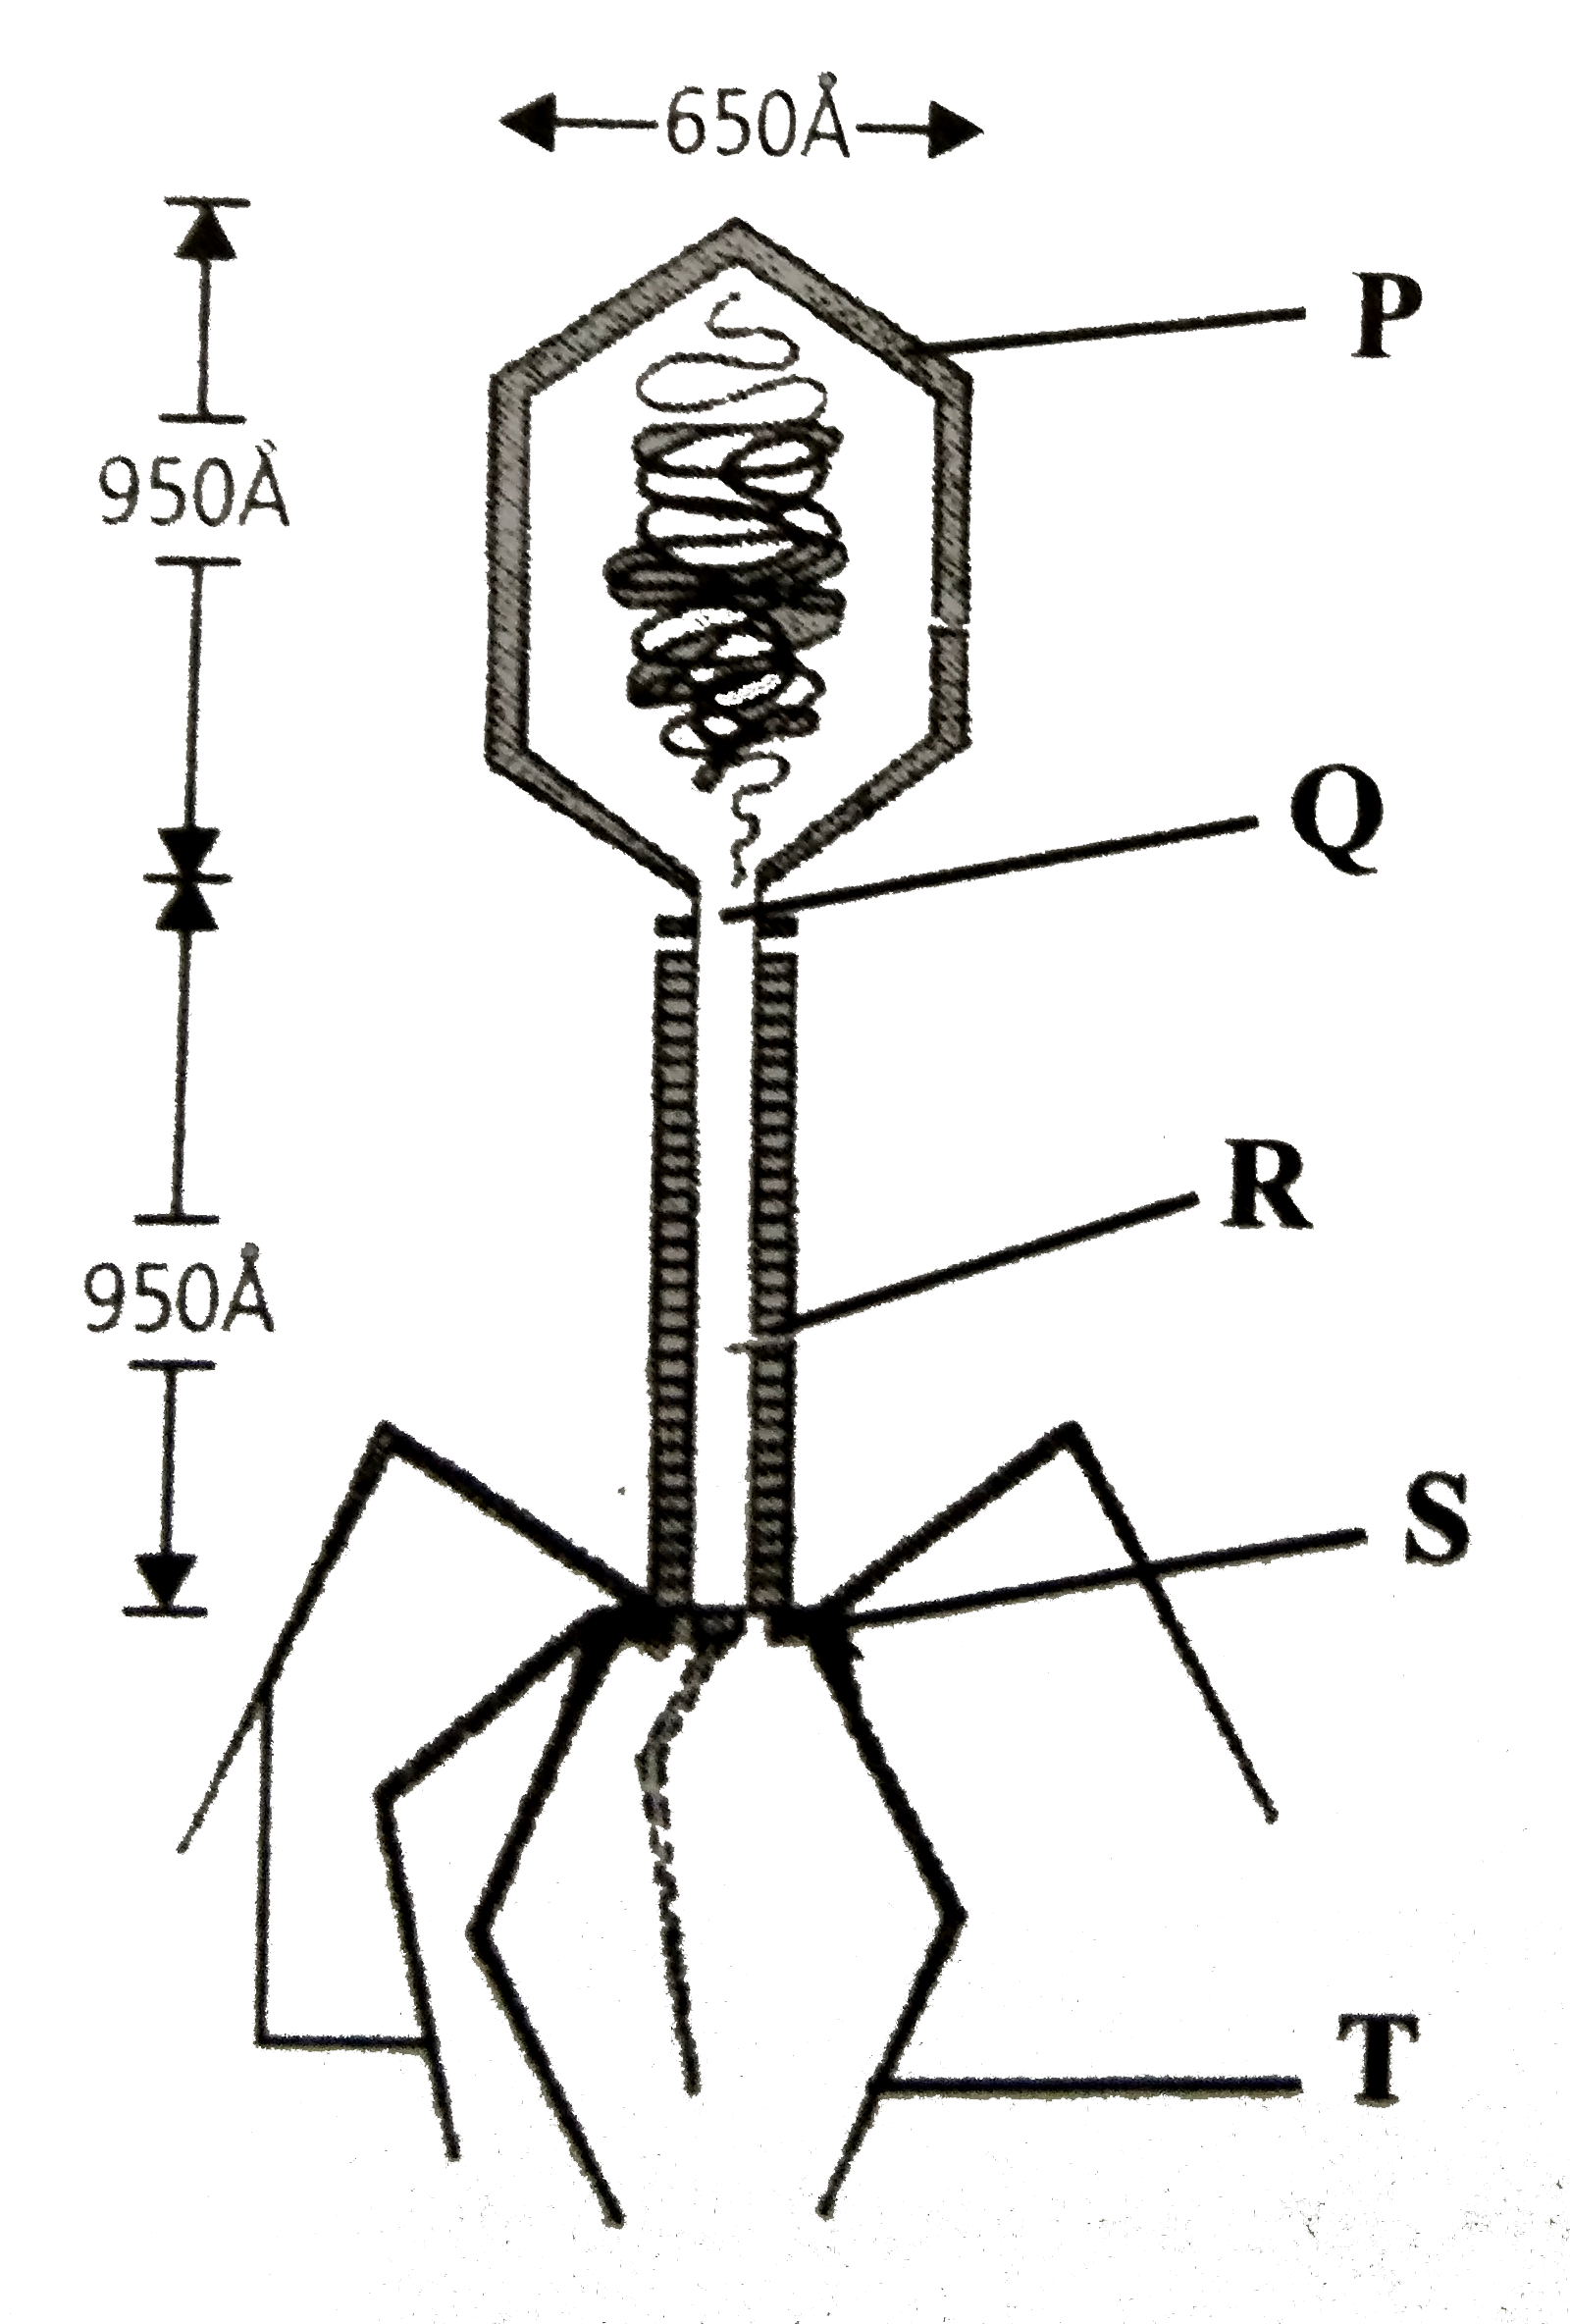 Given is an electron microscopic structure of a T(2) bacteriophage, identify the labelled parts P,Q,R,S and T and select the correct option.